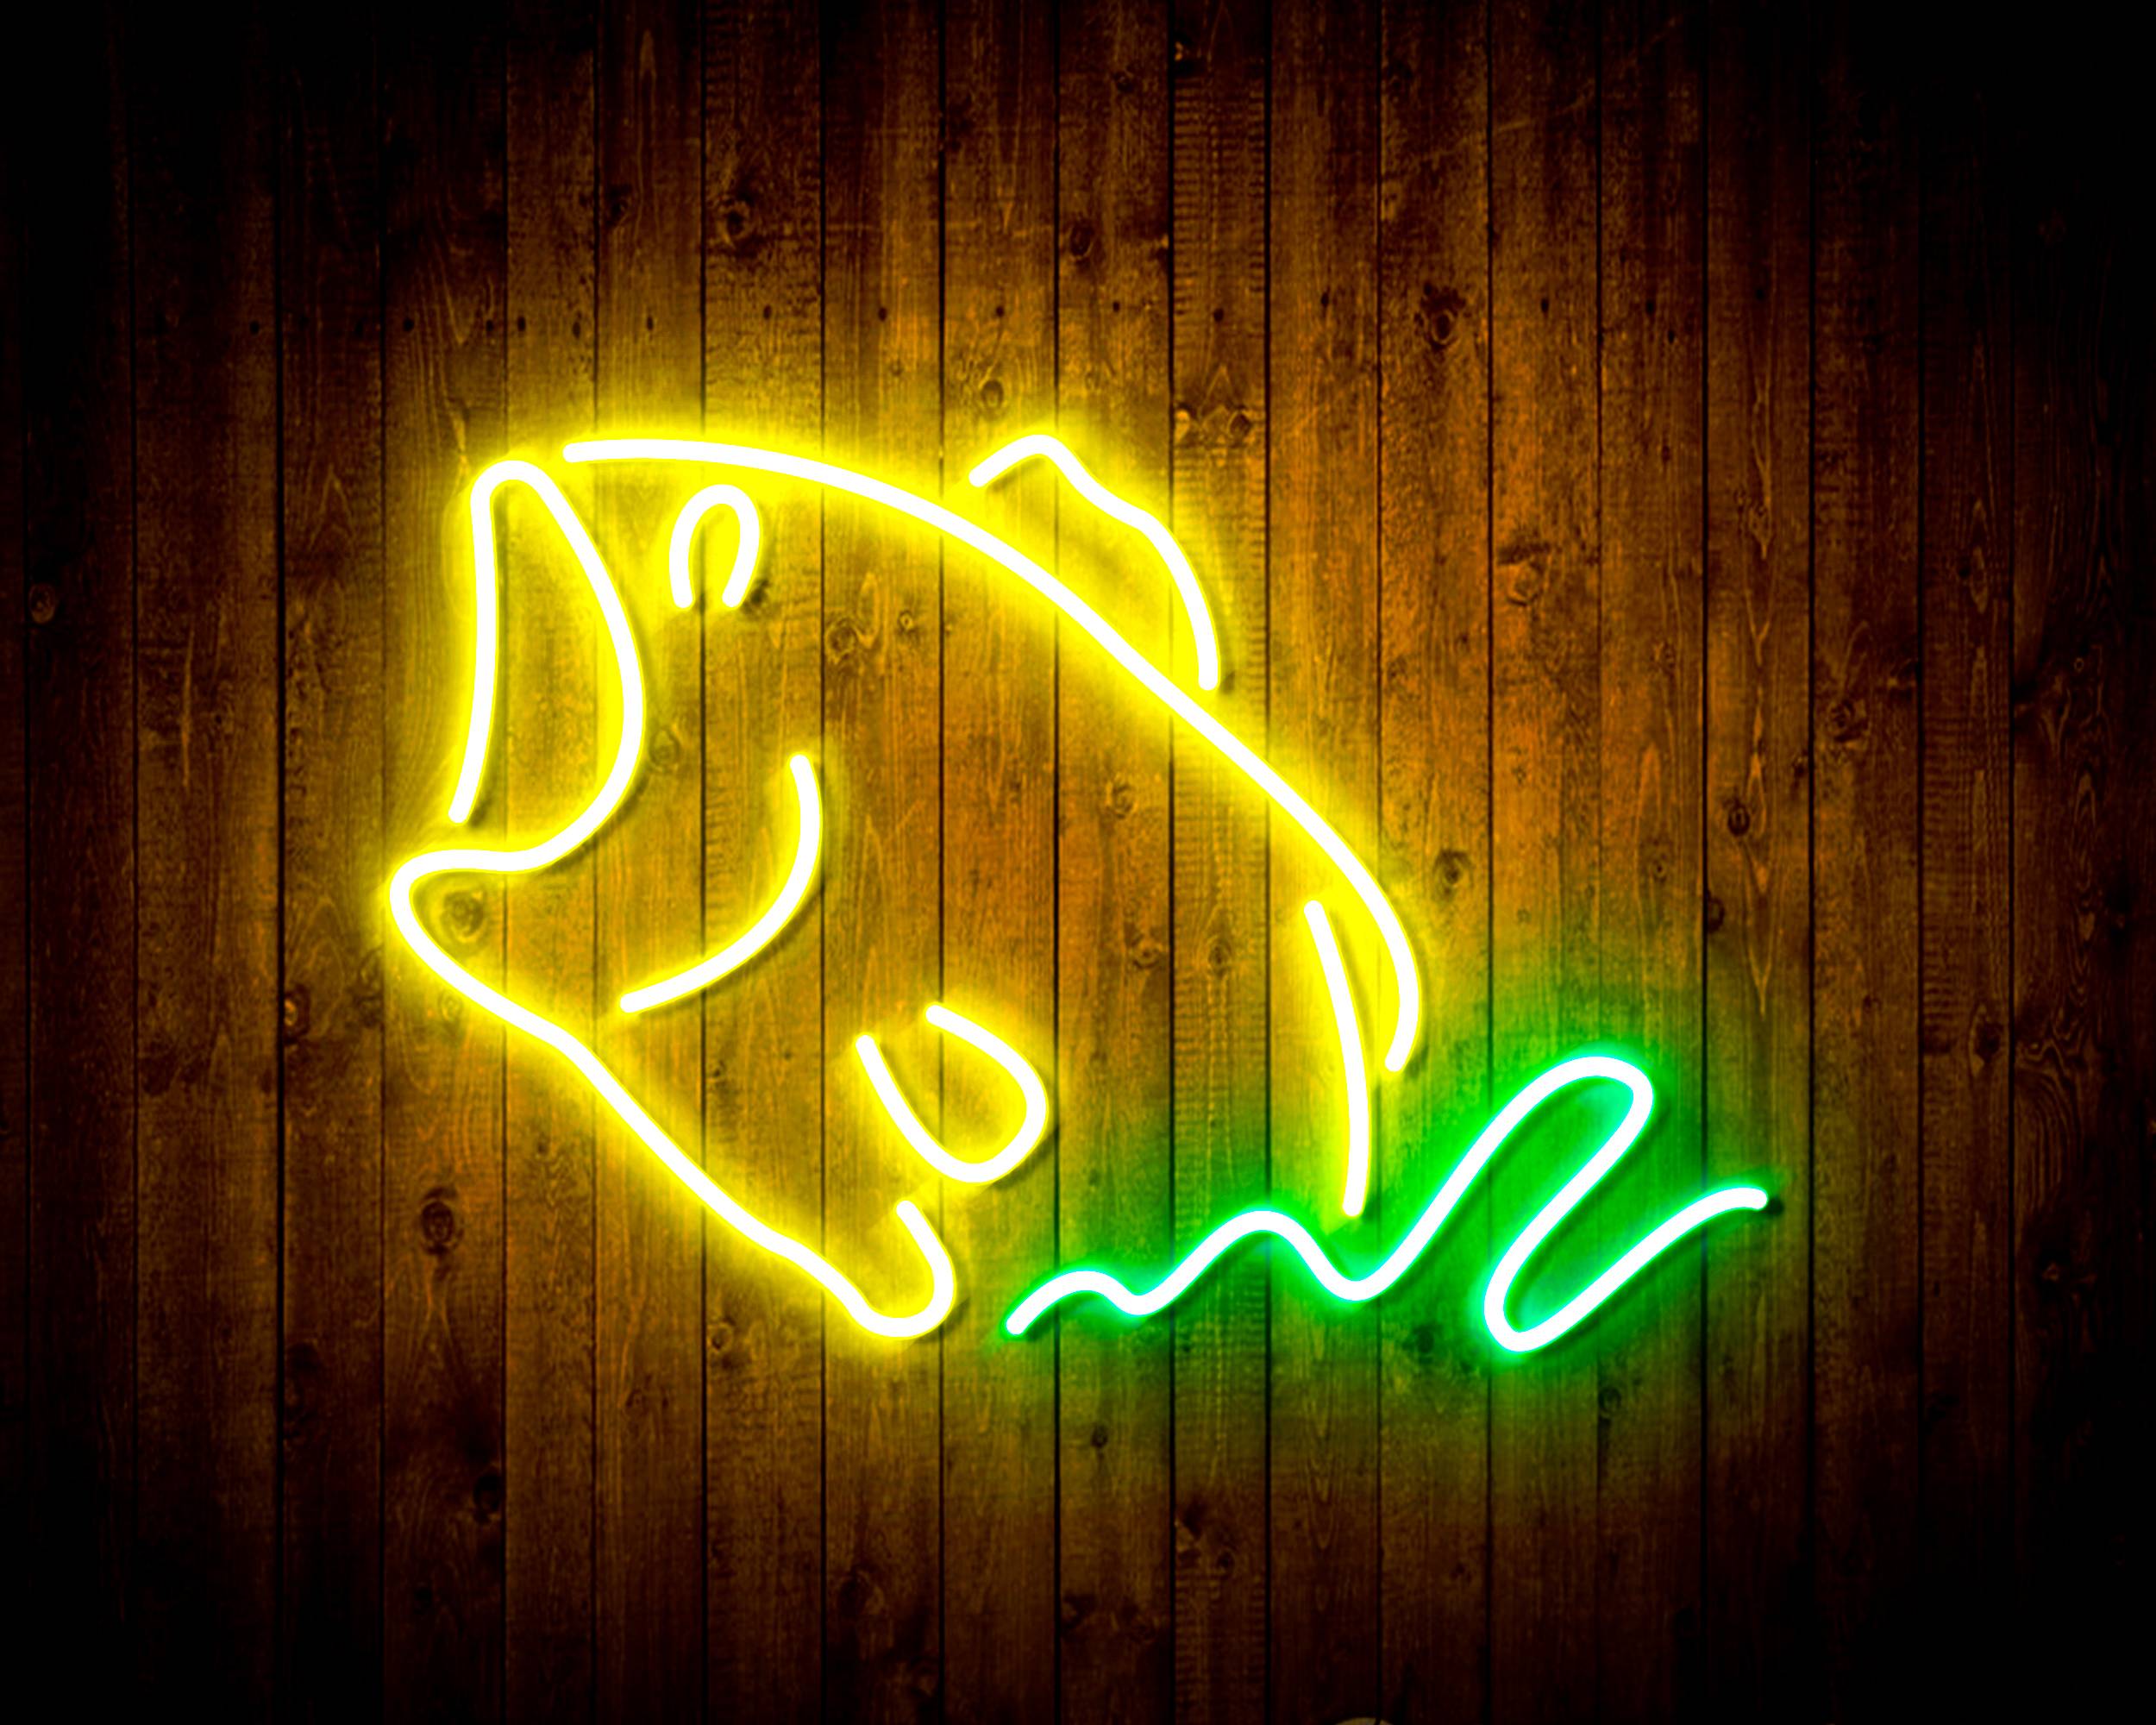 Fish for Busch Bar Neon LED Sign